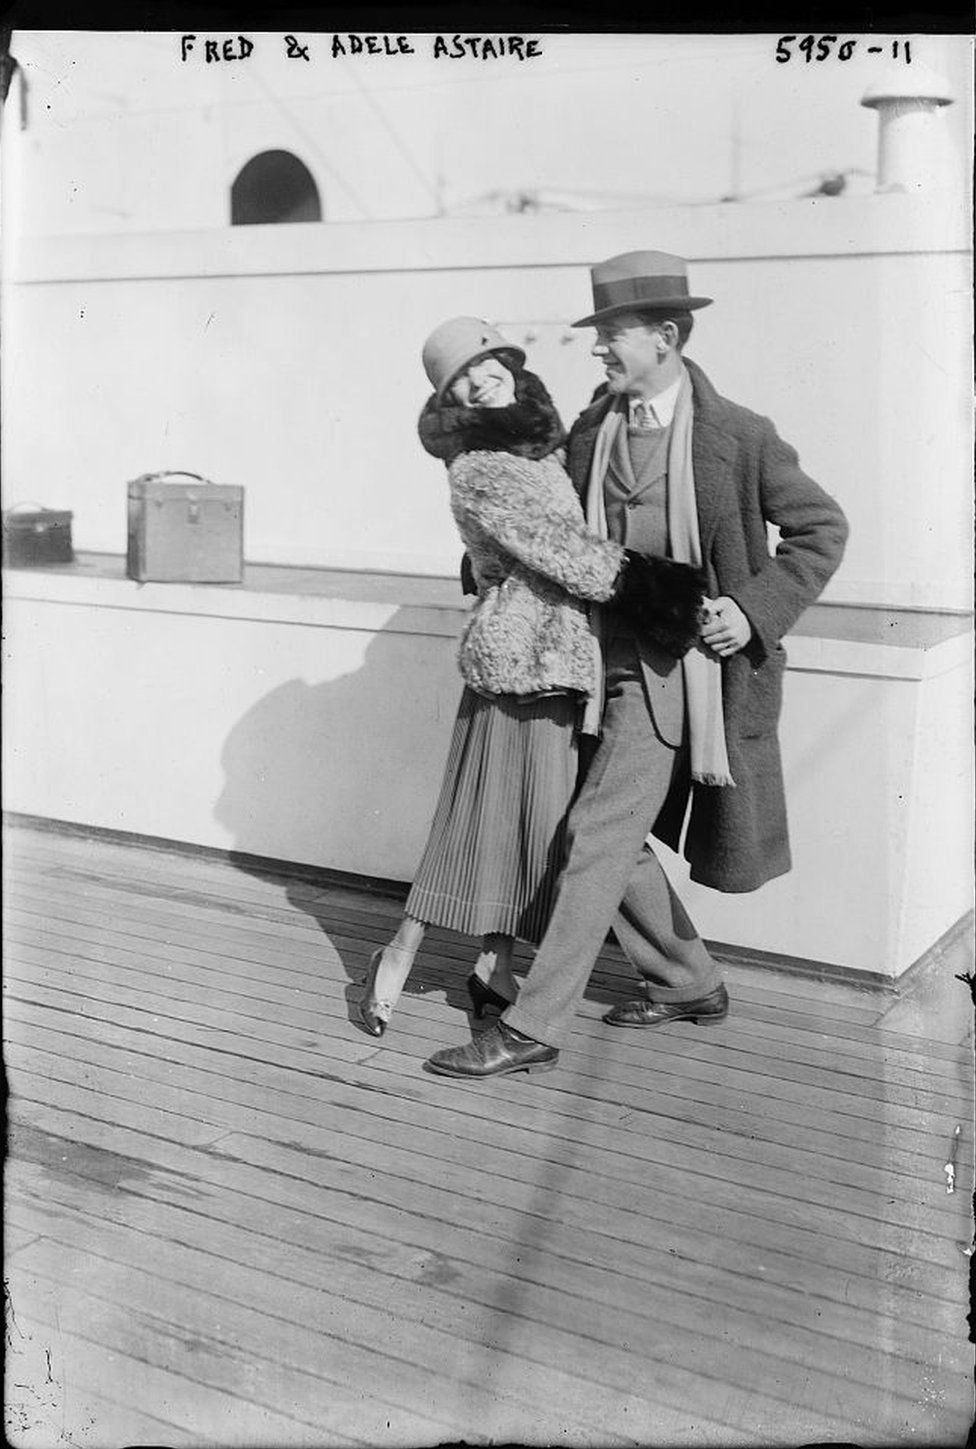 Fred and Adele Astaire bound for London 1922